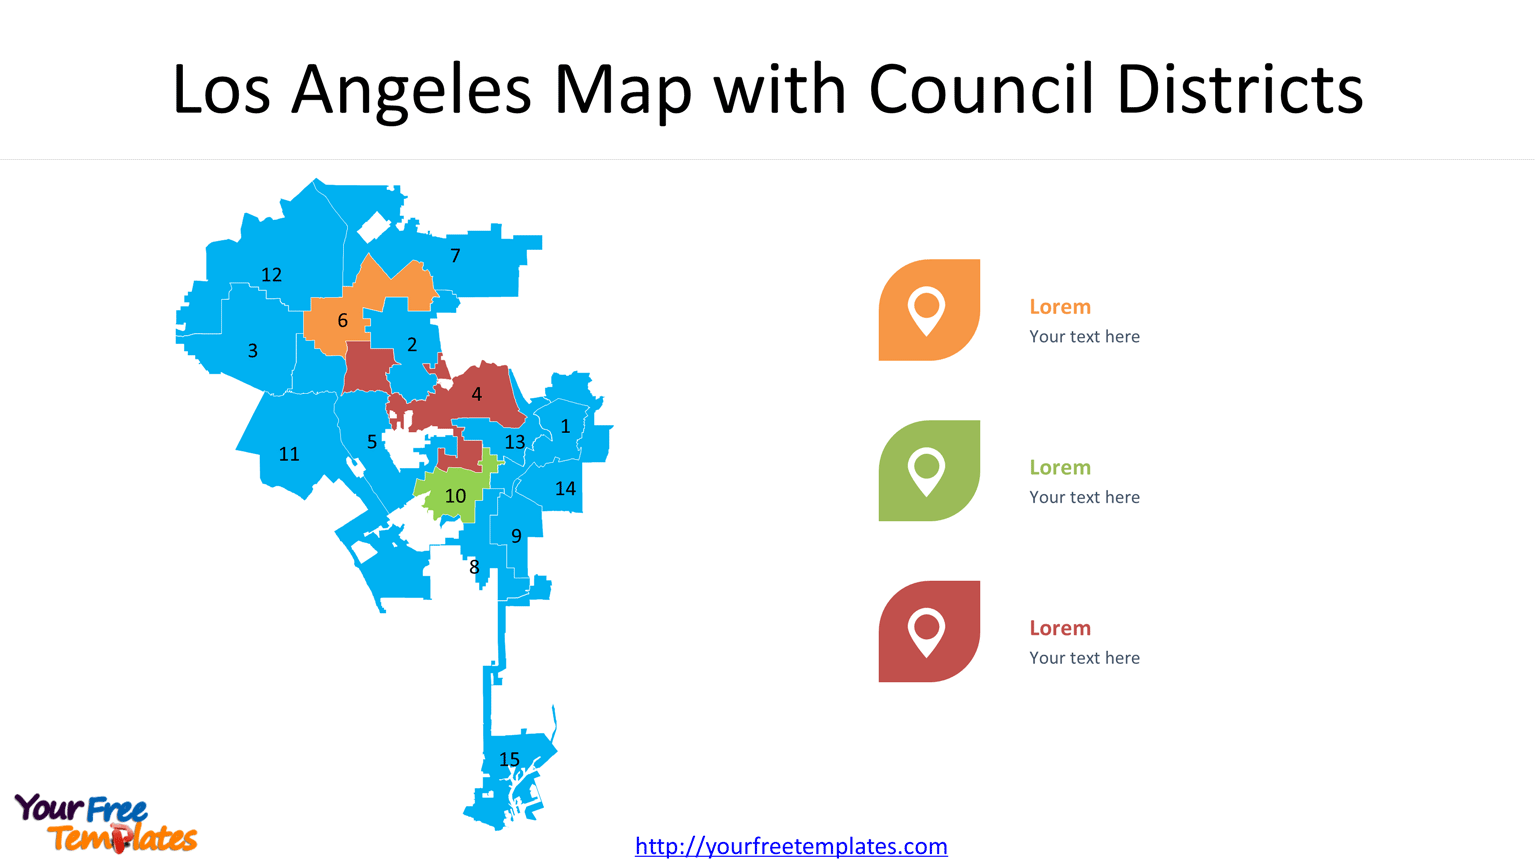 Los Angeles map with 15 Council Districts